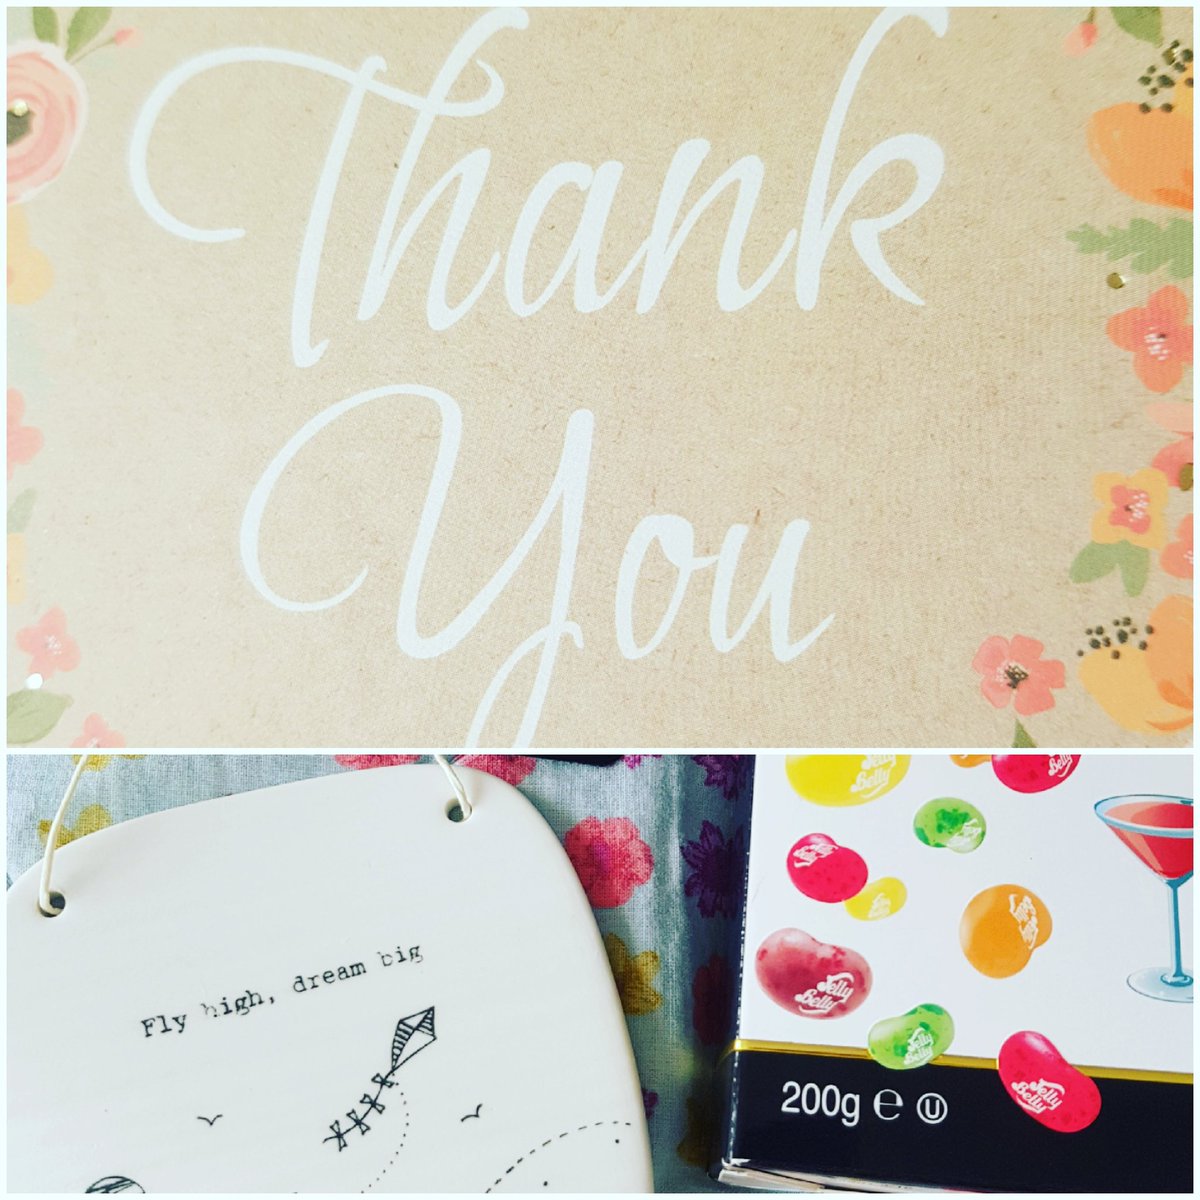 Shout out @daisy_dighton from @thestrokeassociation for card and lovely message and lovely things from @MBelindajane.Both support amazing. You guys rock. kept me sane &encourage the past week. Thank both #support #sanity #positivesideofstroke #supportnetworks #lovelypeople #heart